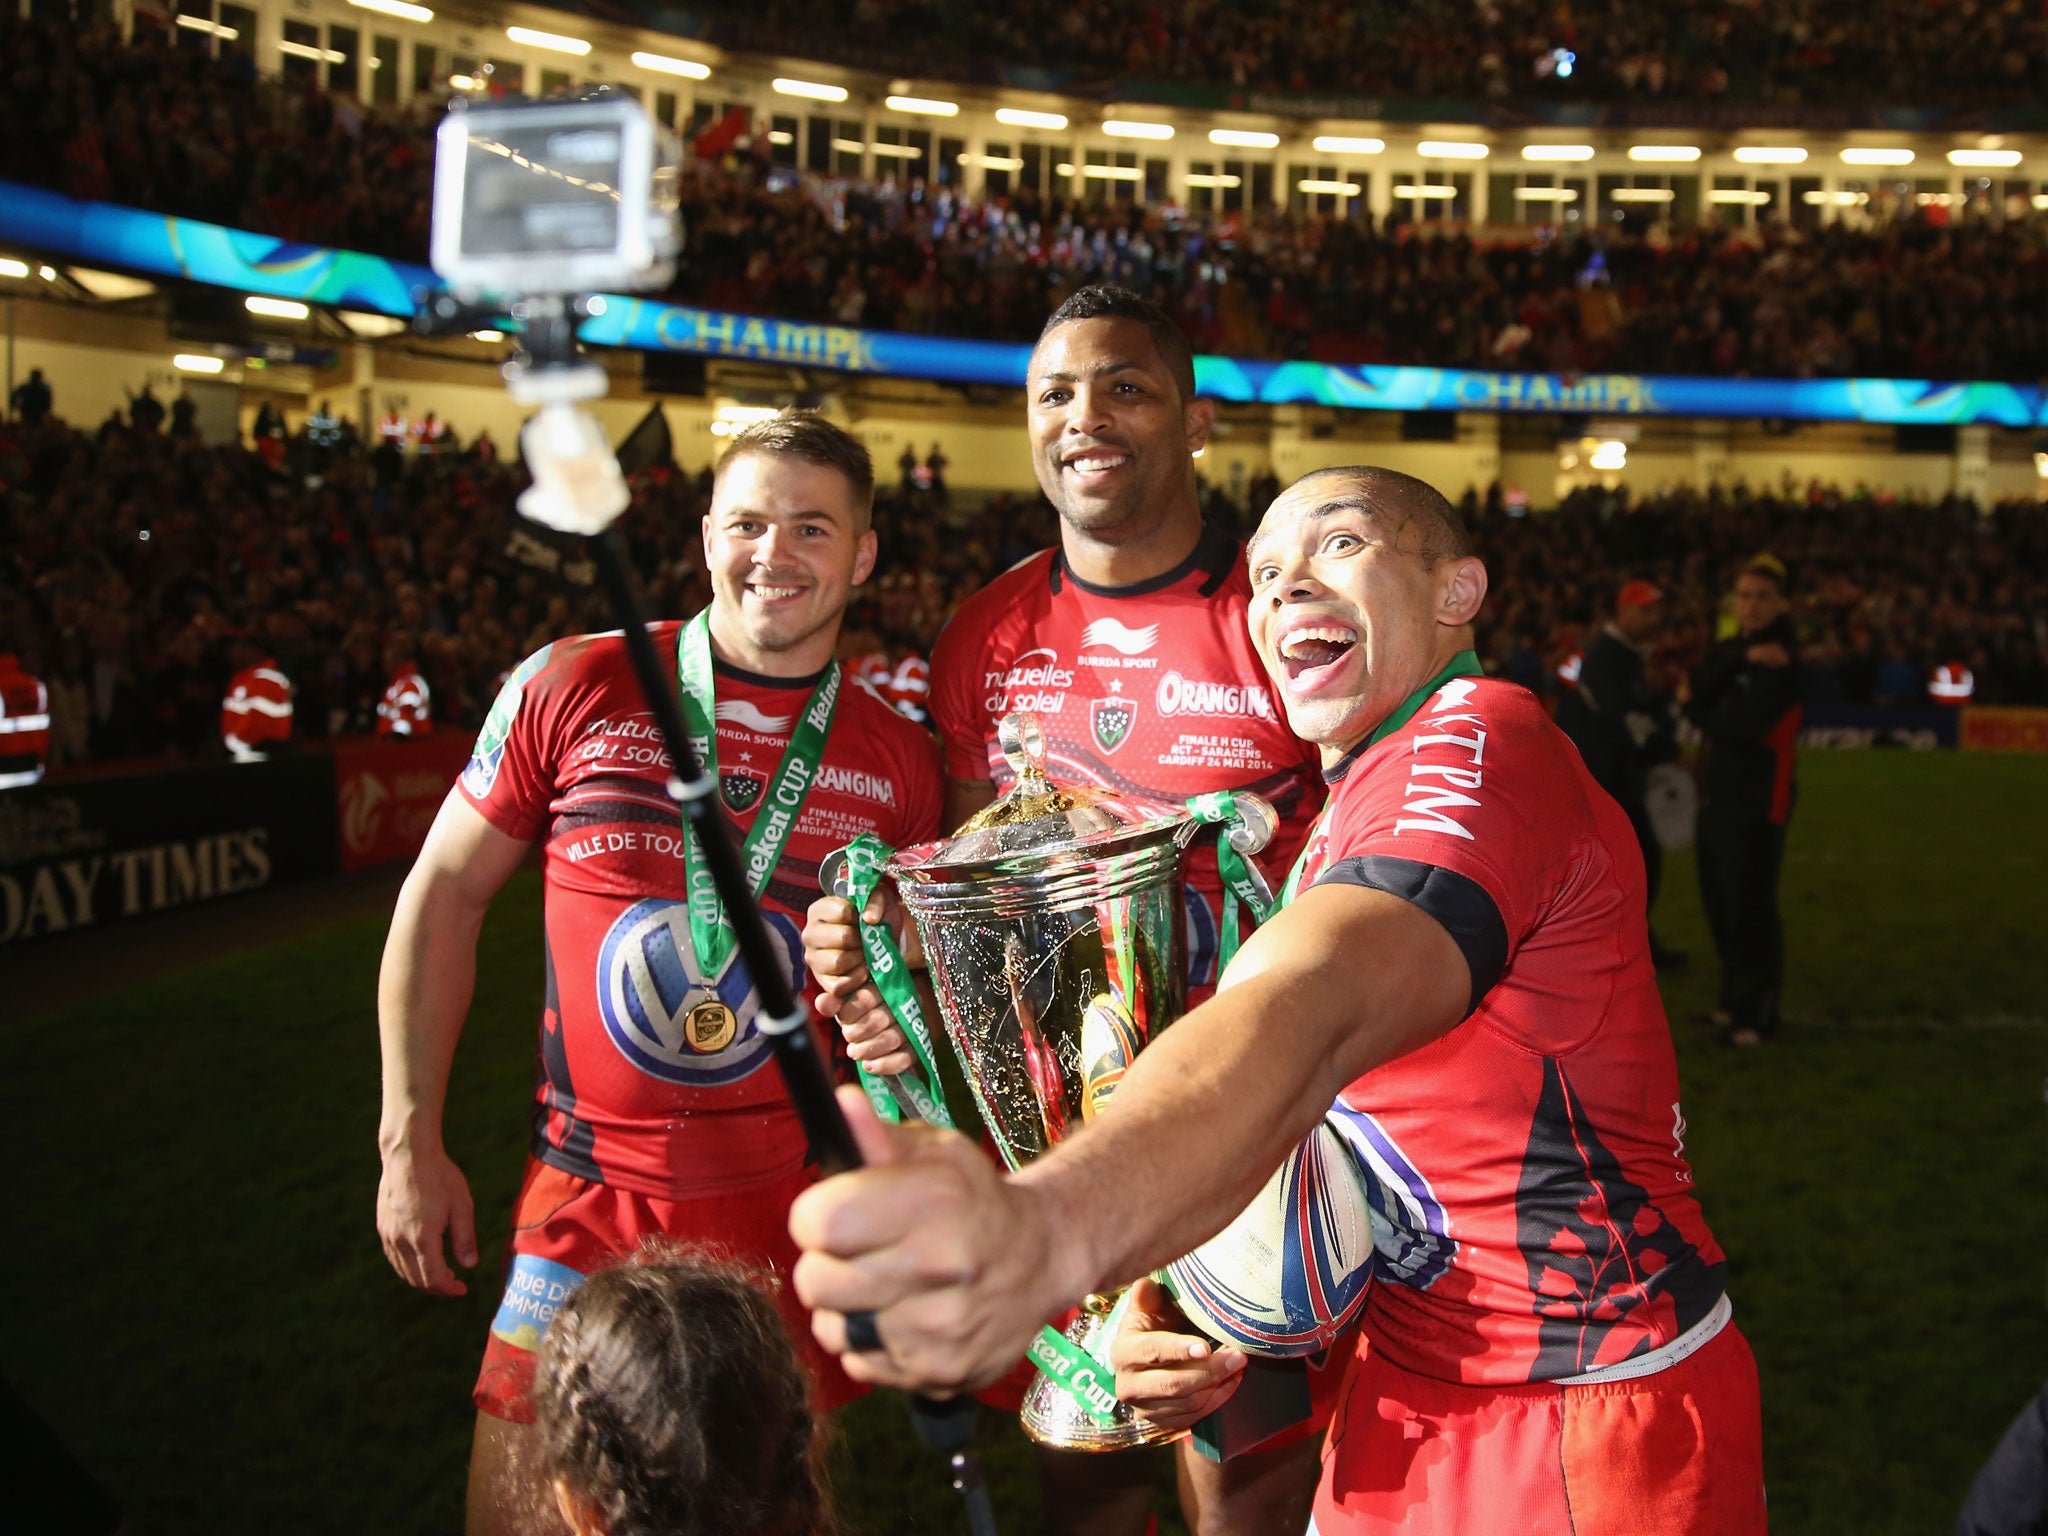 Bryan Habana, right, of Toulon, takes a selfie with team-mates Delon Armitage, centre, and Drew Mitchell after winning the Heineken Cup